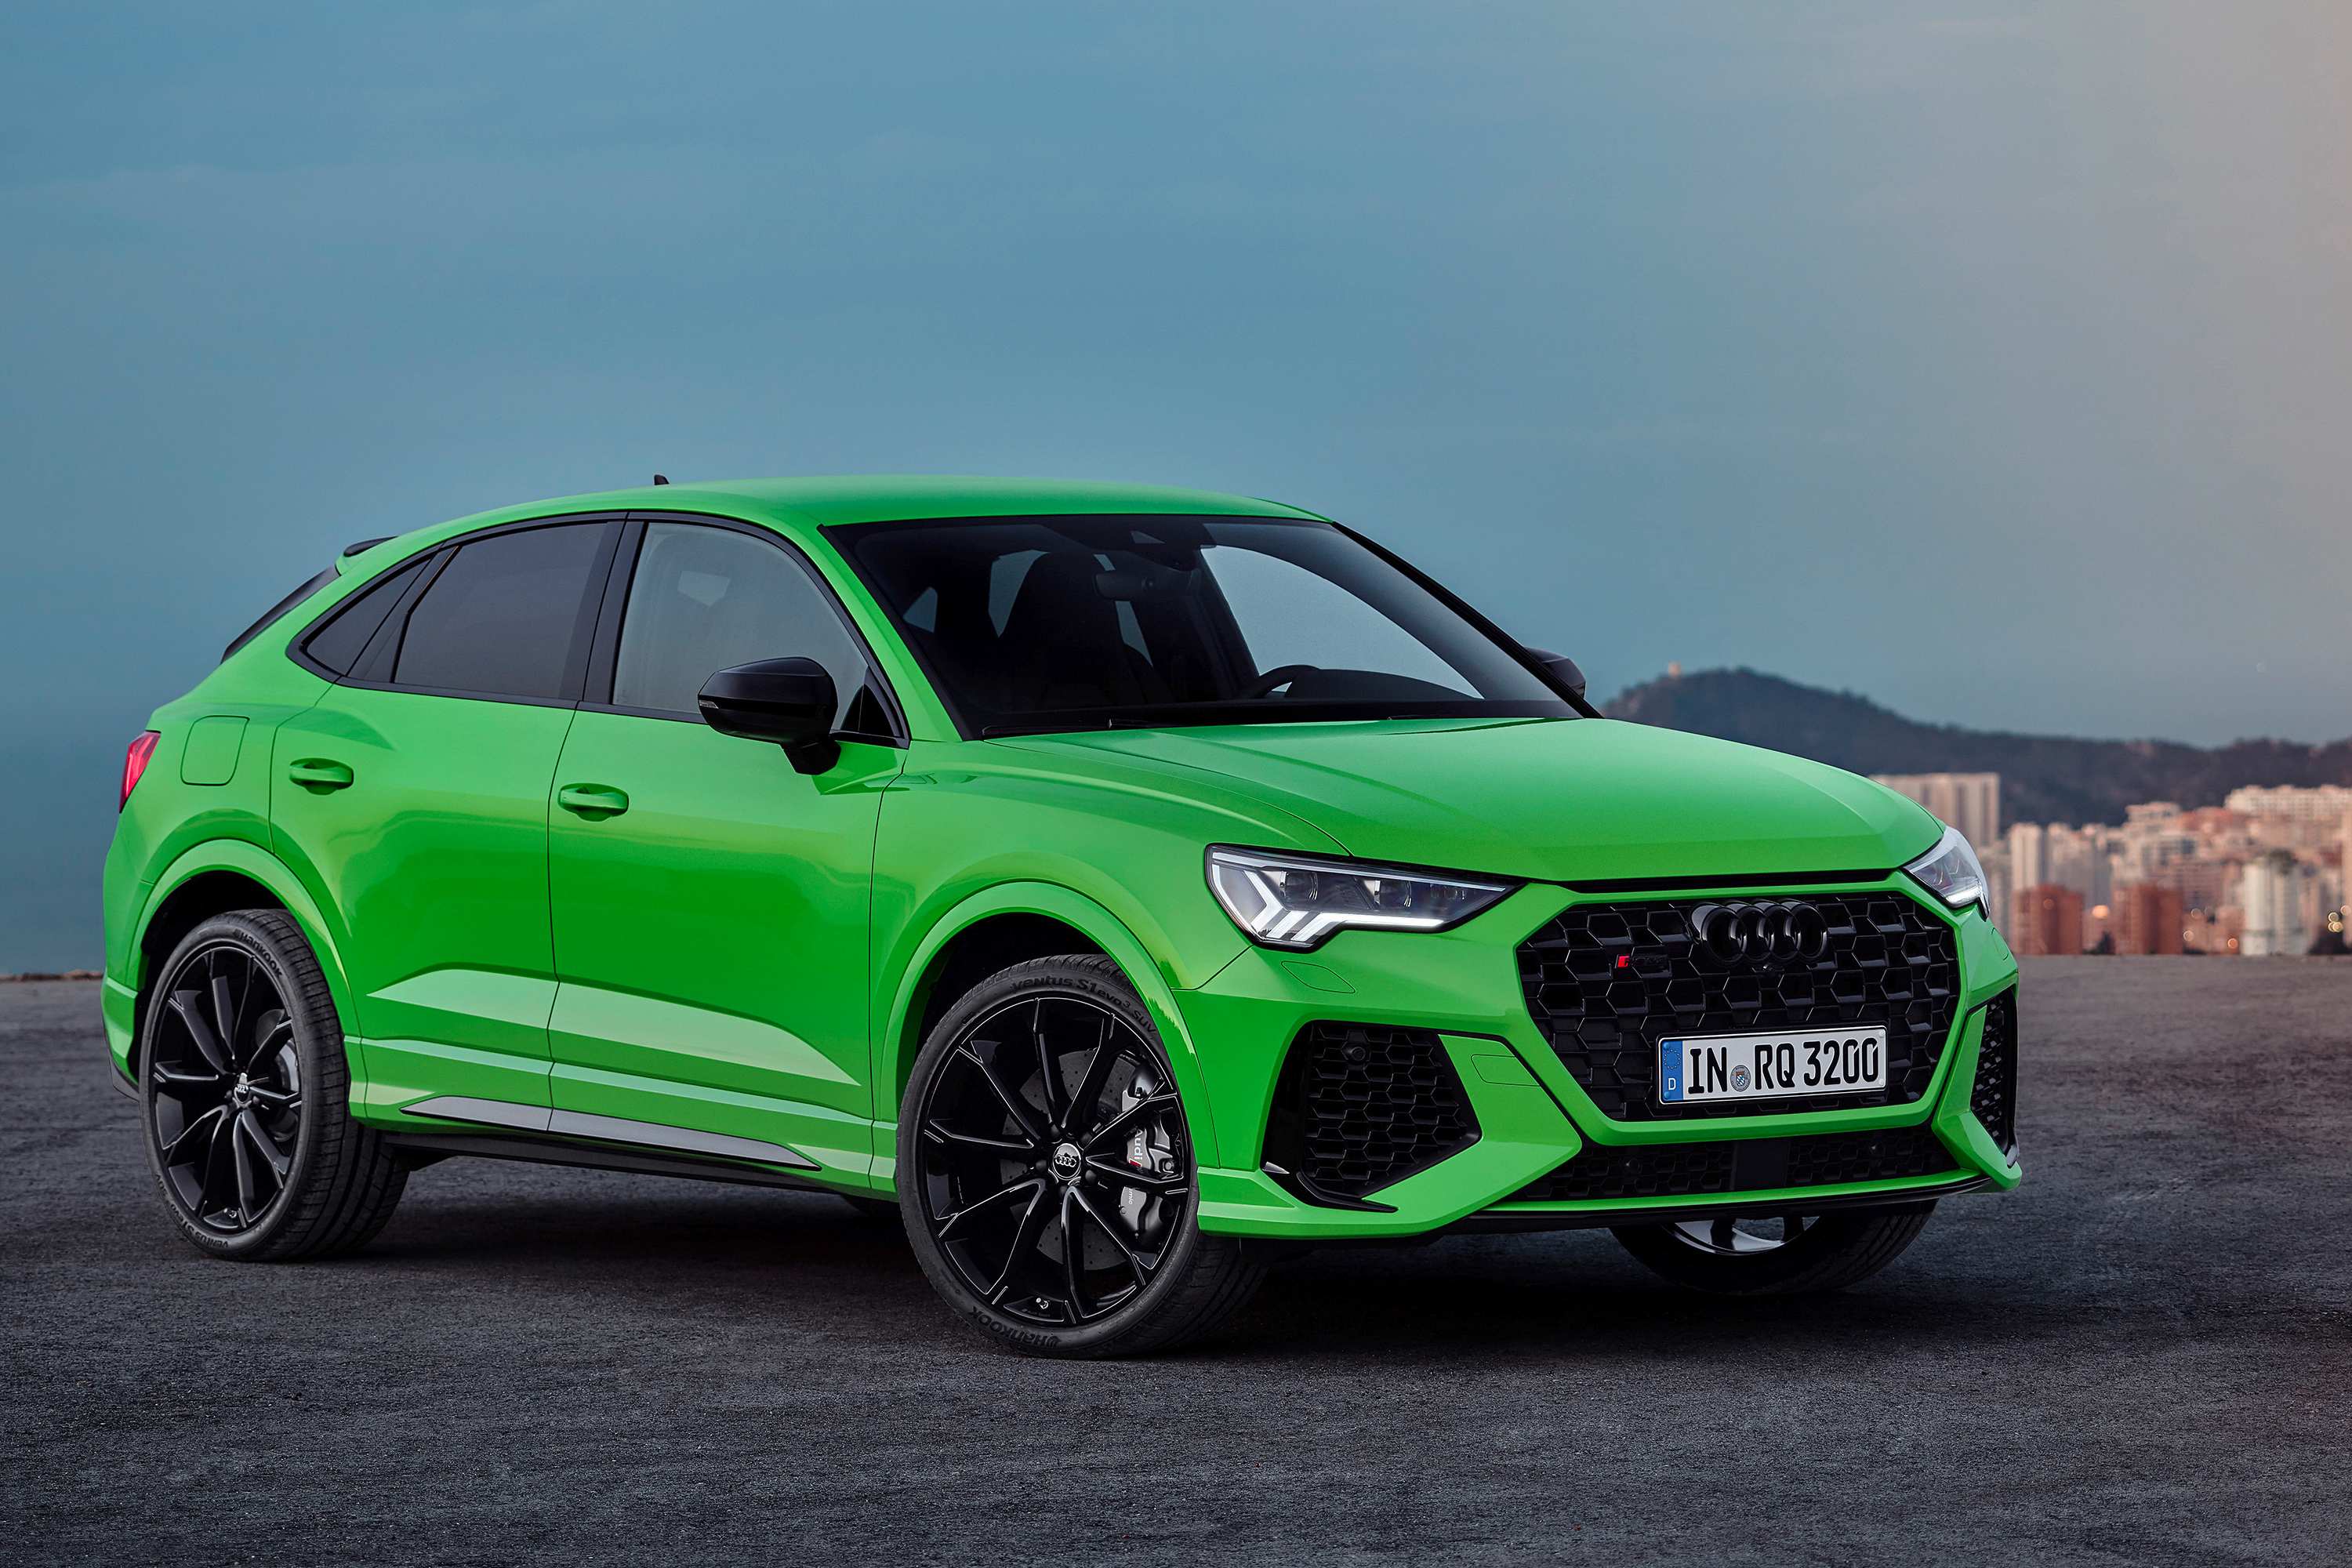 The first Audi RS Q3 Sportback customer deliveries are expected to arrive in August 2020.